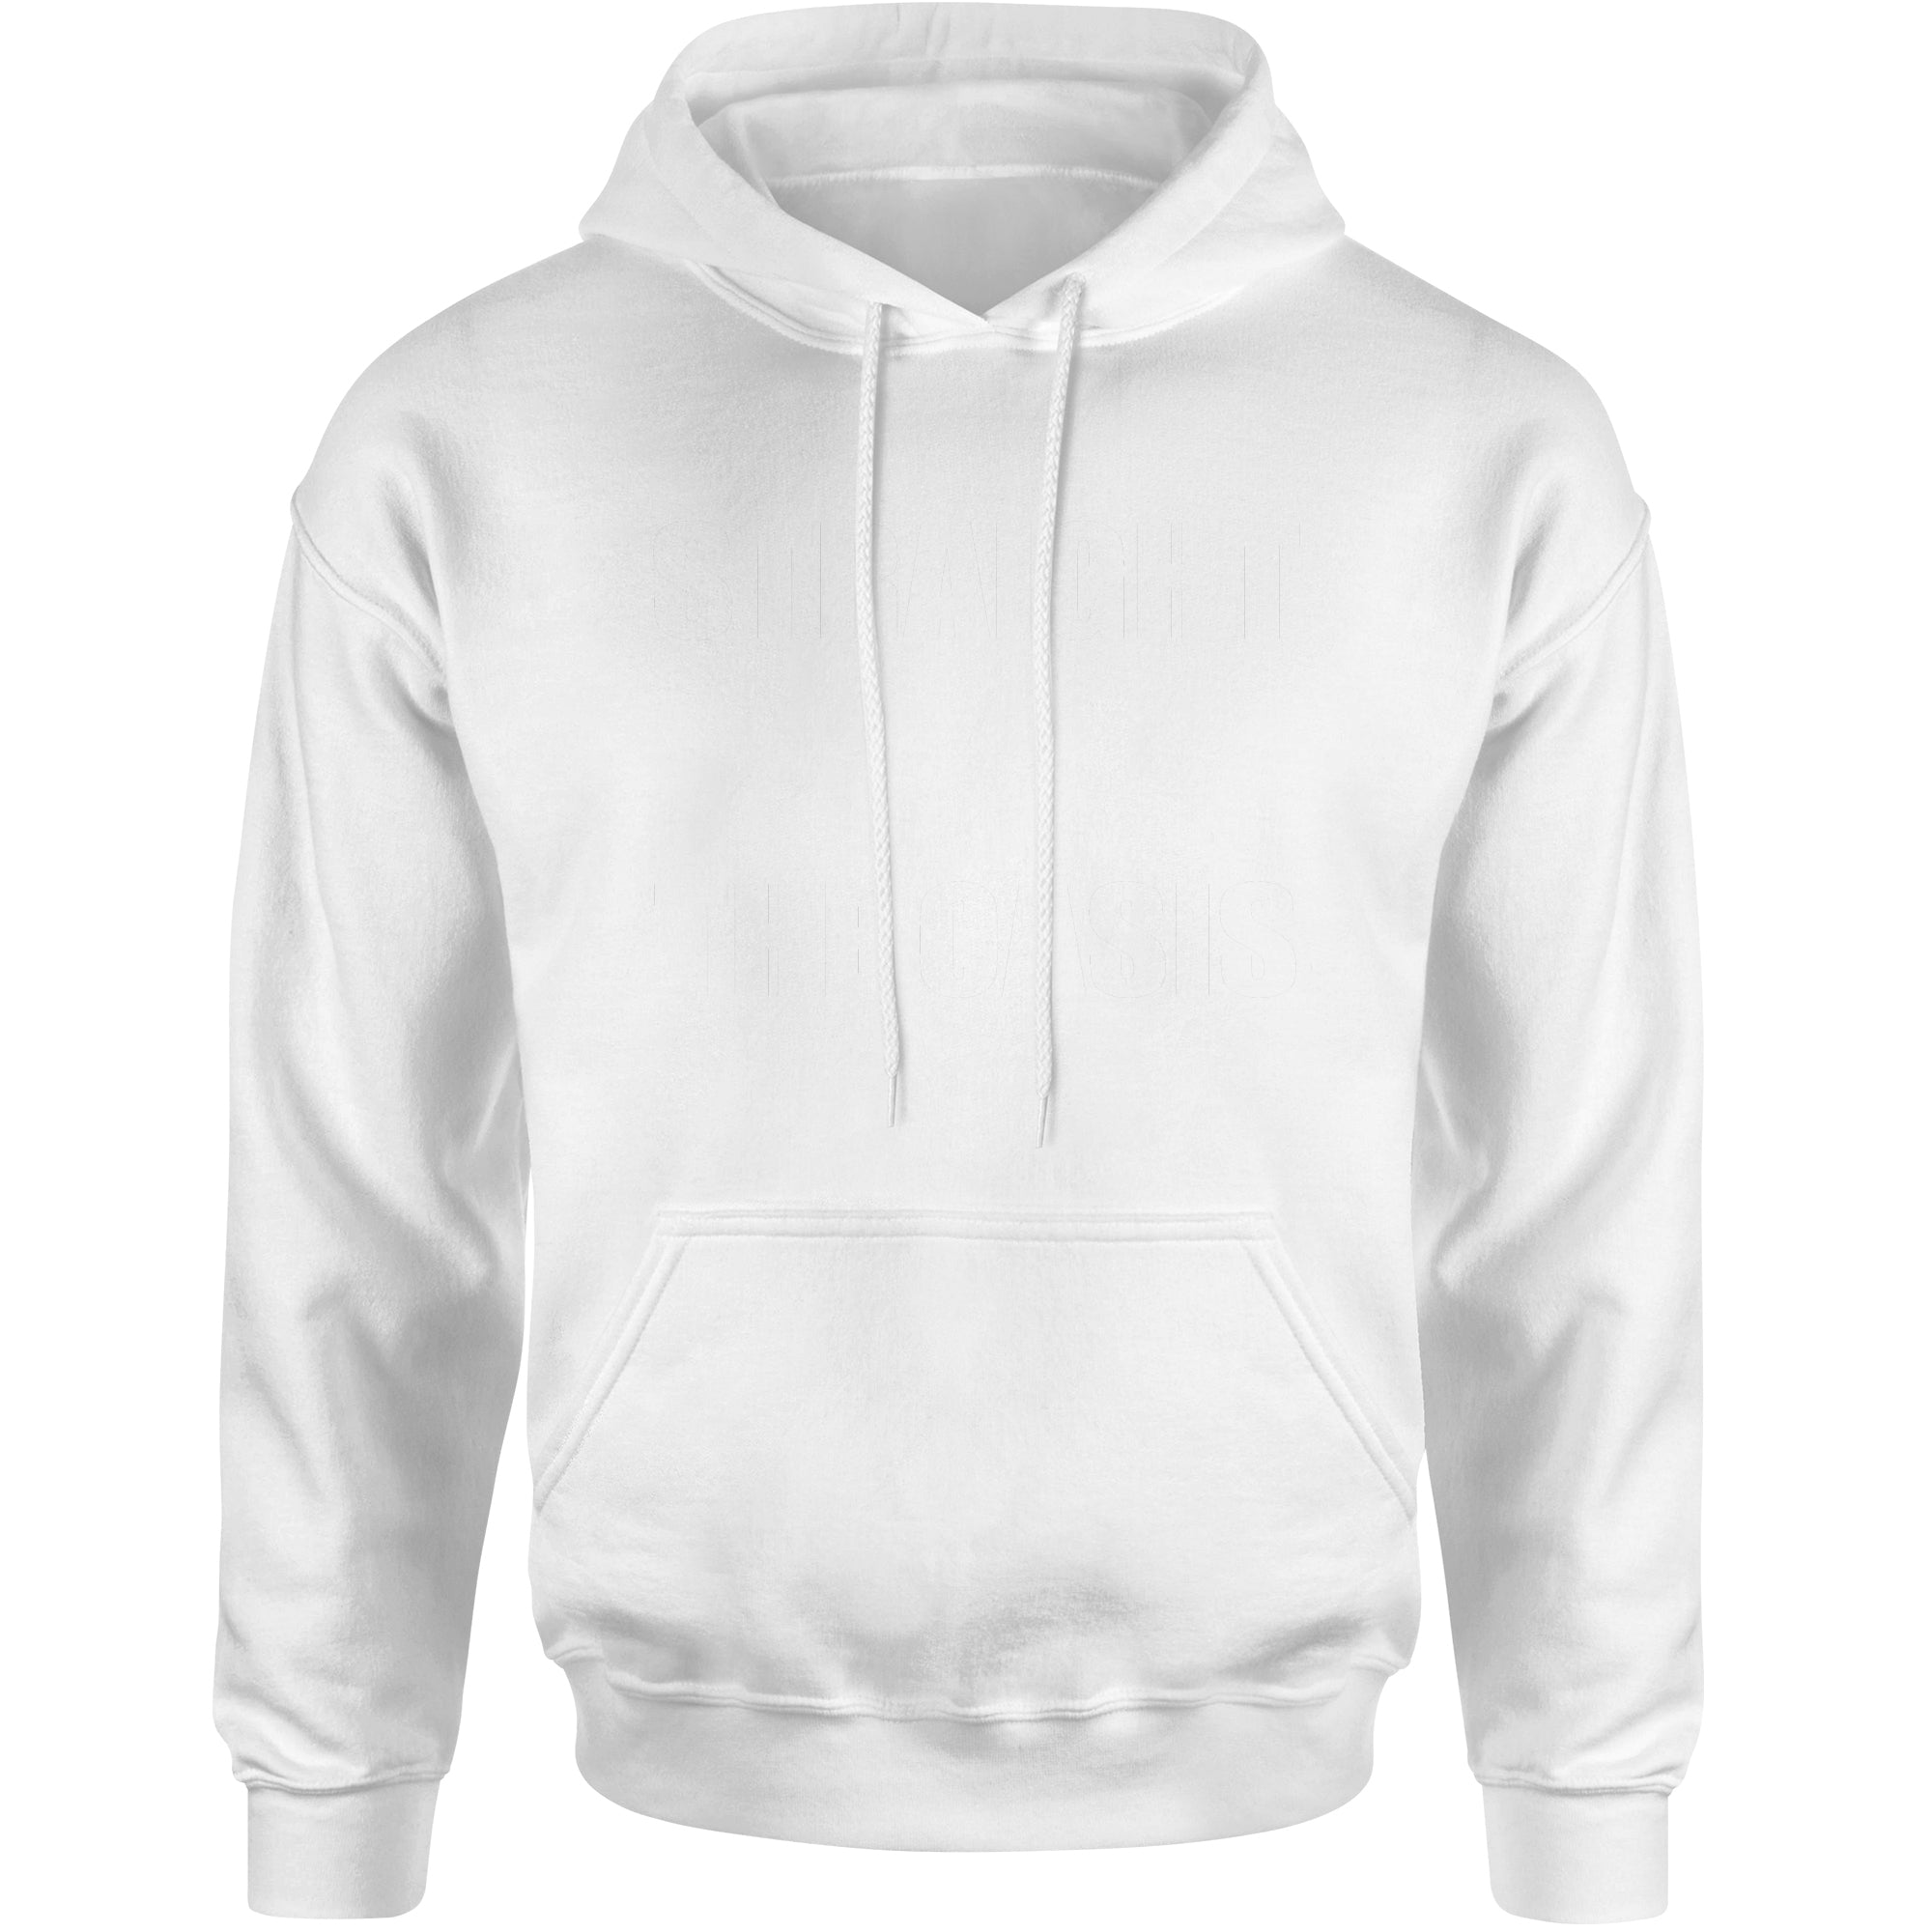 Striaght Outta The Oasis player one ready  Hoodie